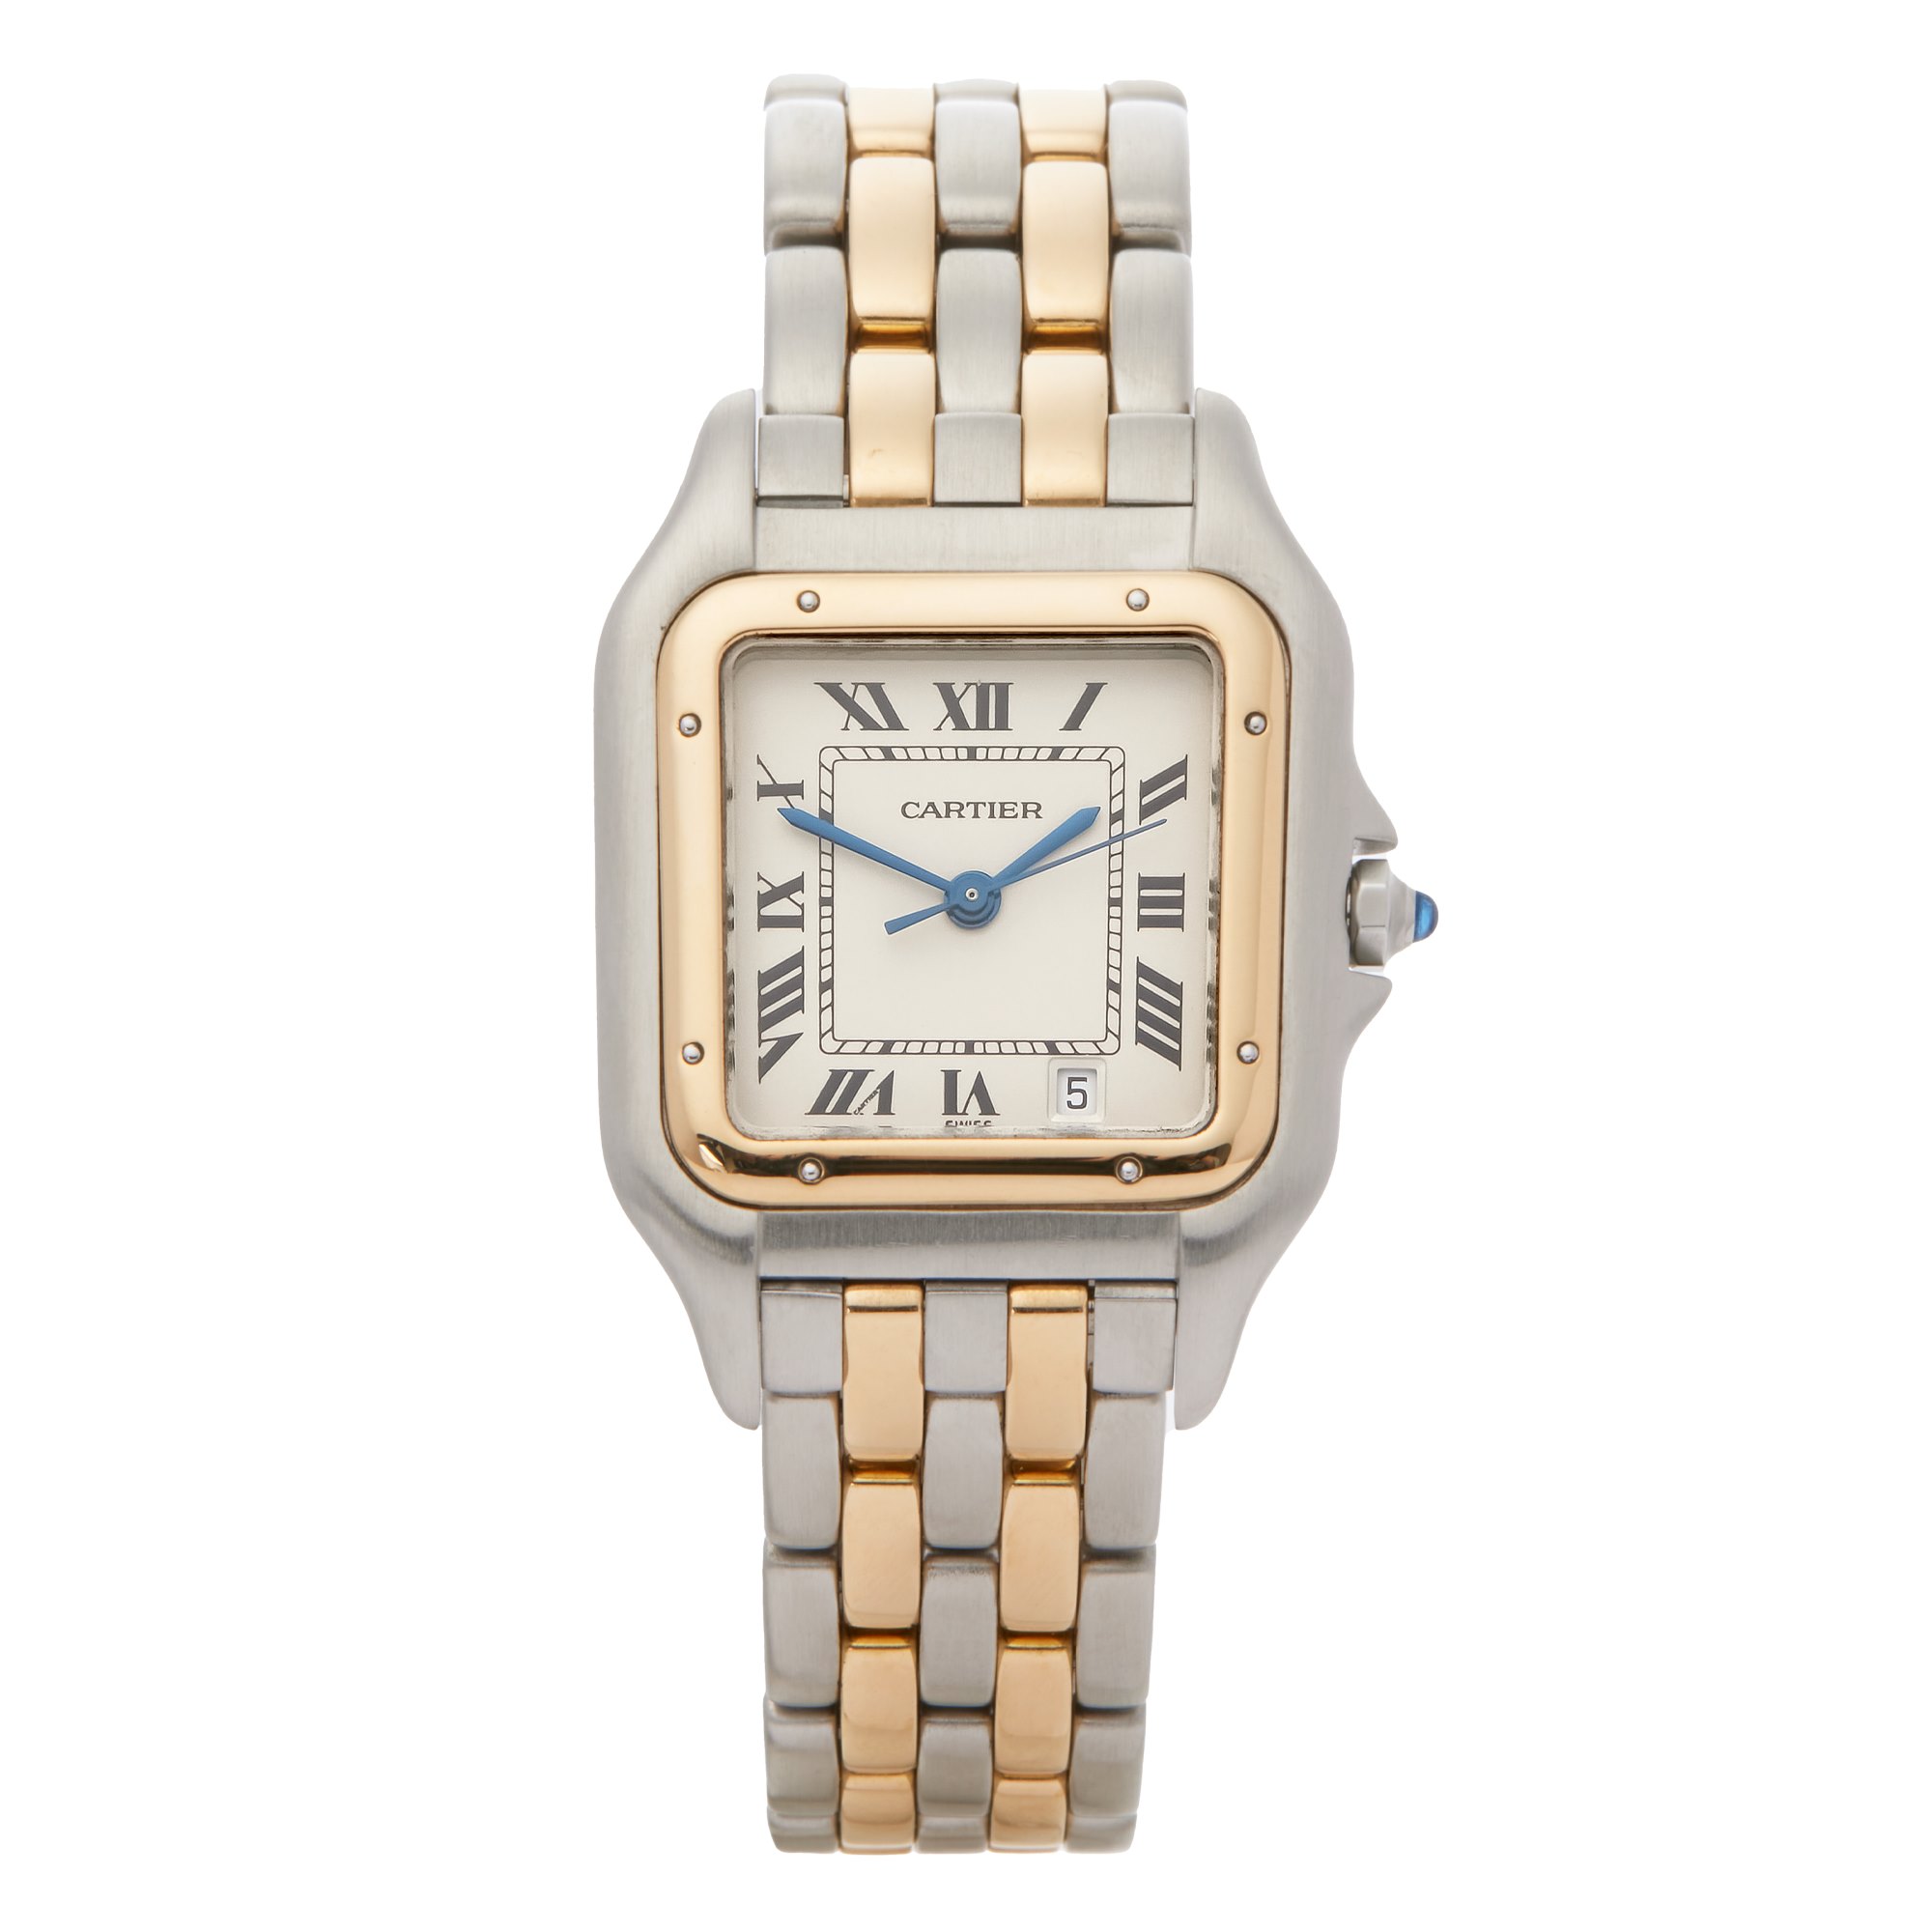 Cartier Panthère 2 Row Yellow Gold & Stainless Steel 183949